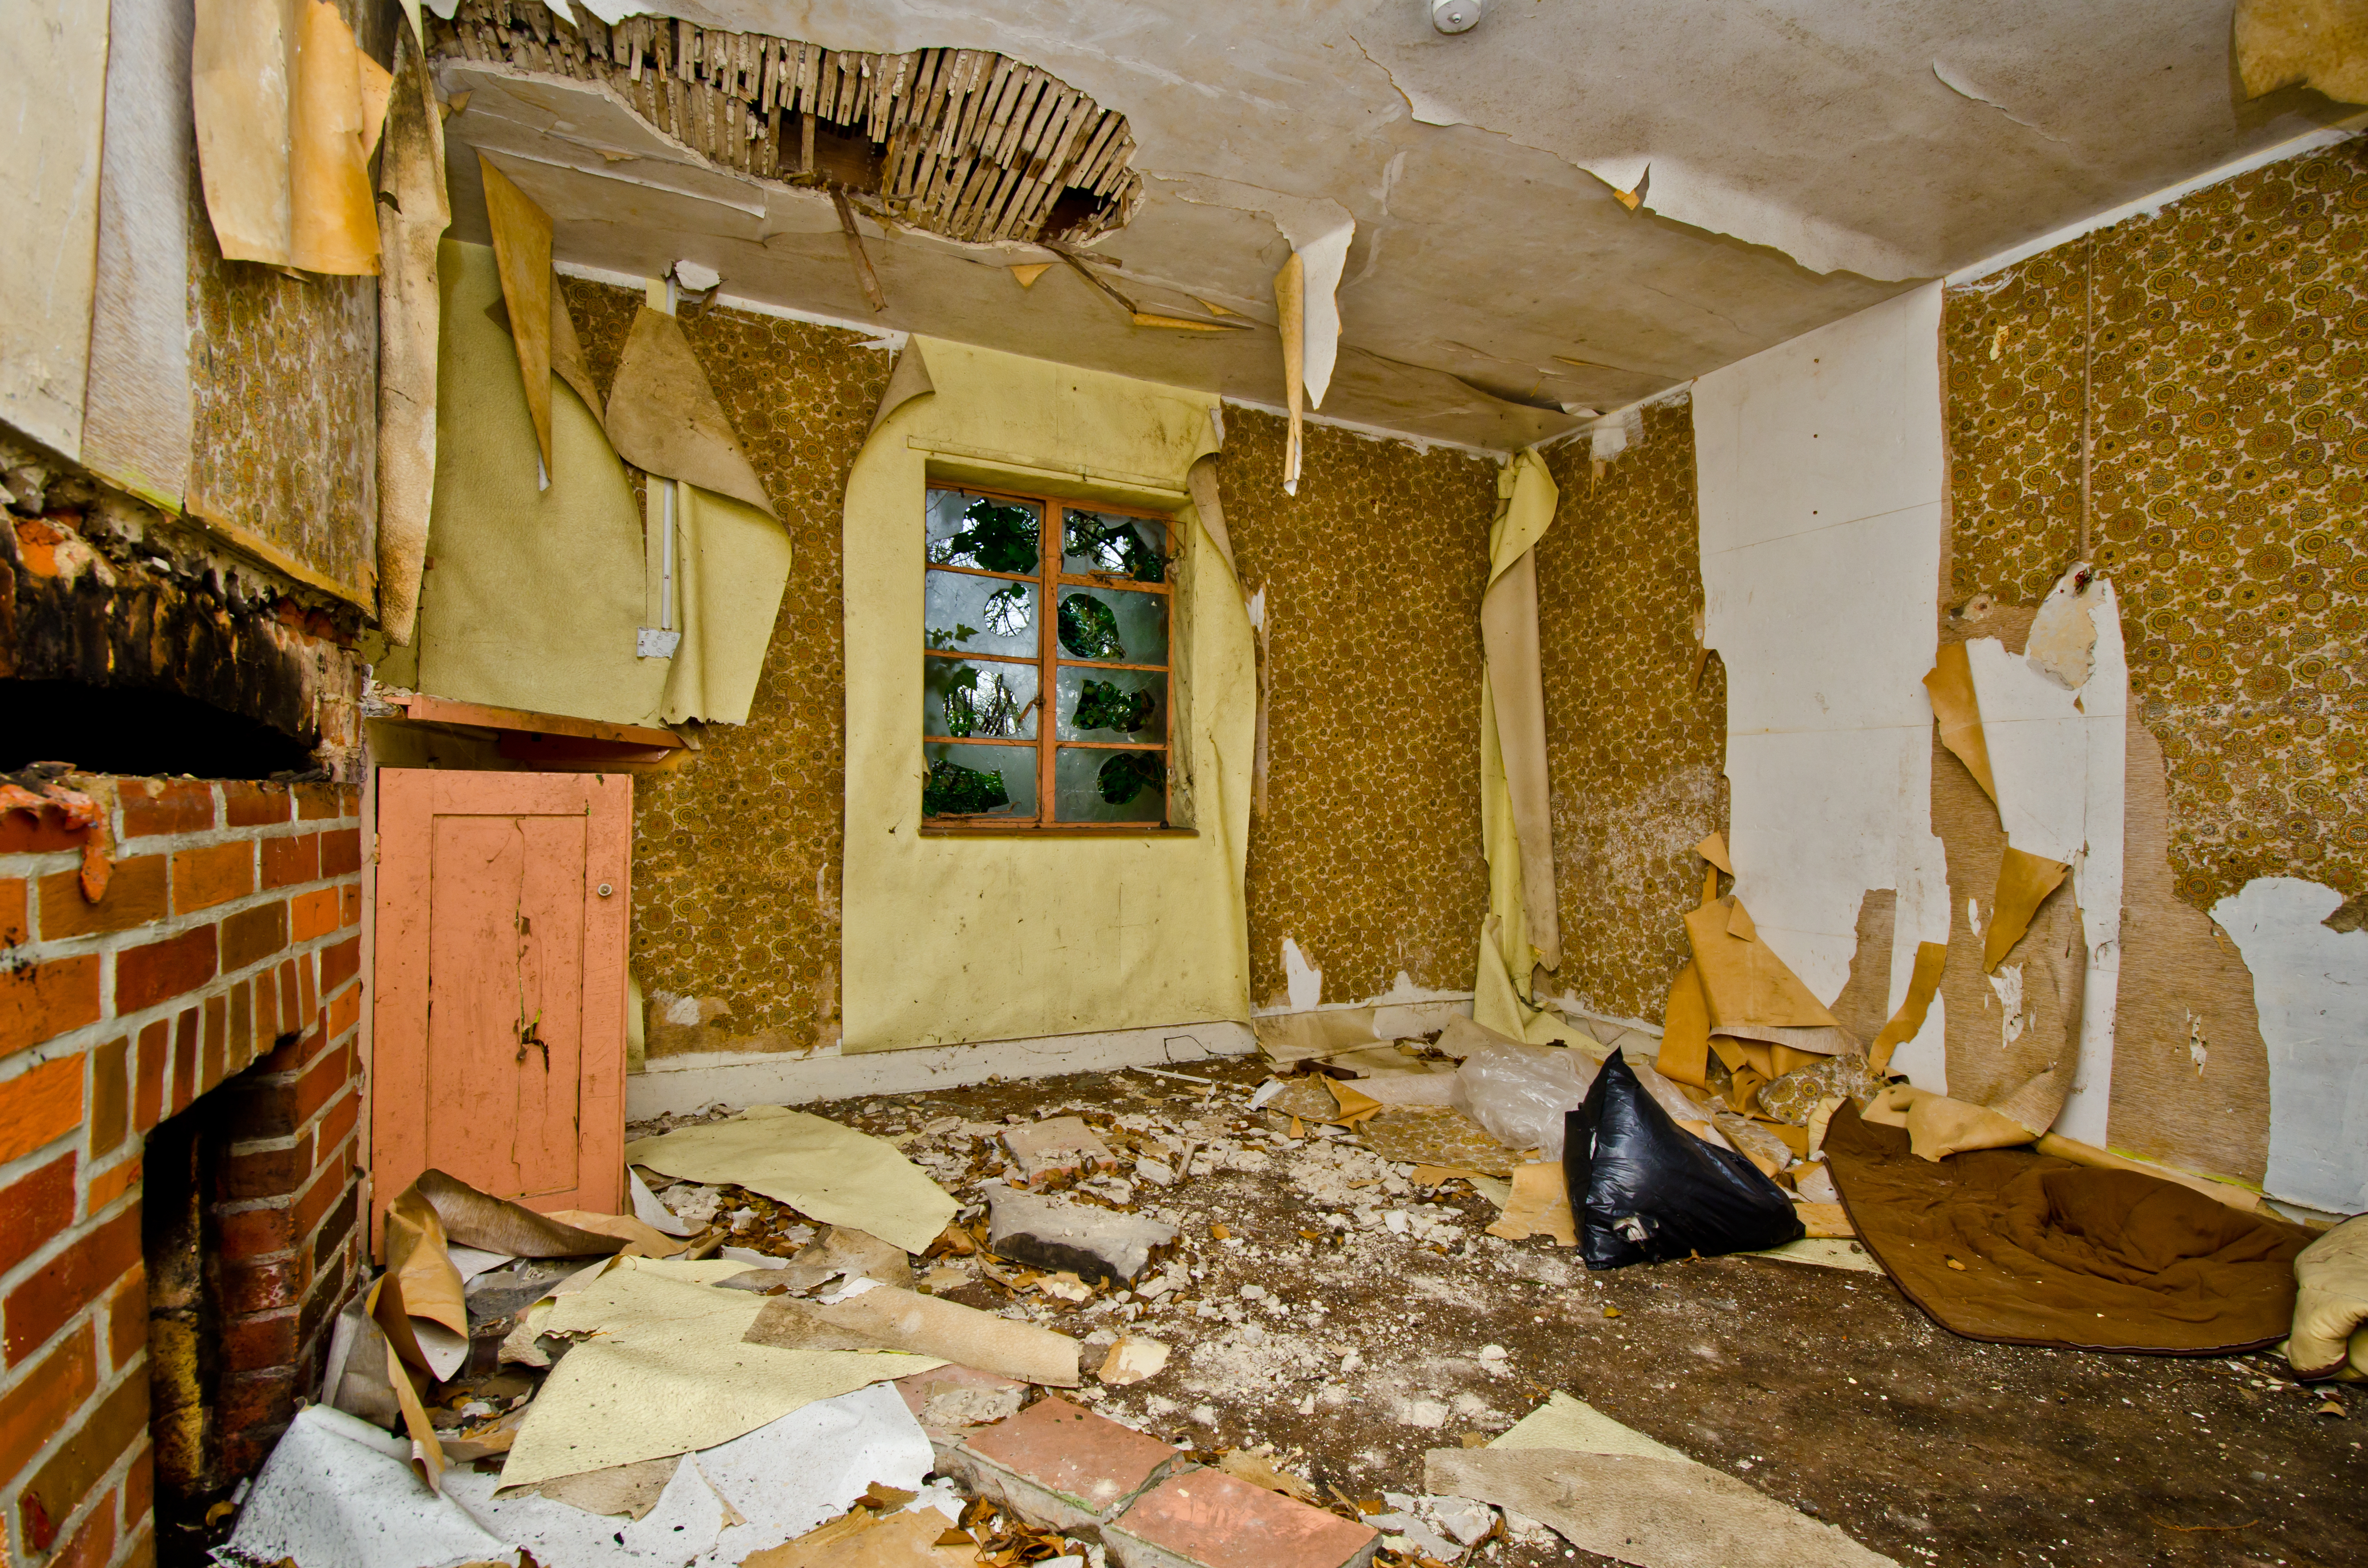 Interiors of a neglected house. | Source: Shutterstock